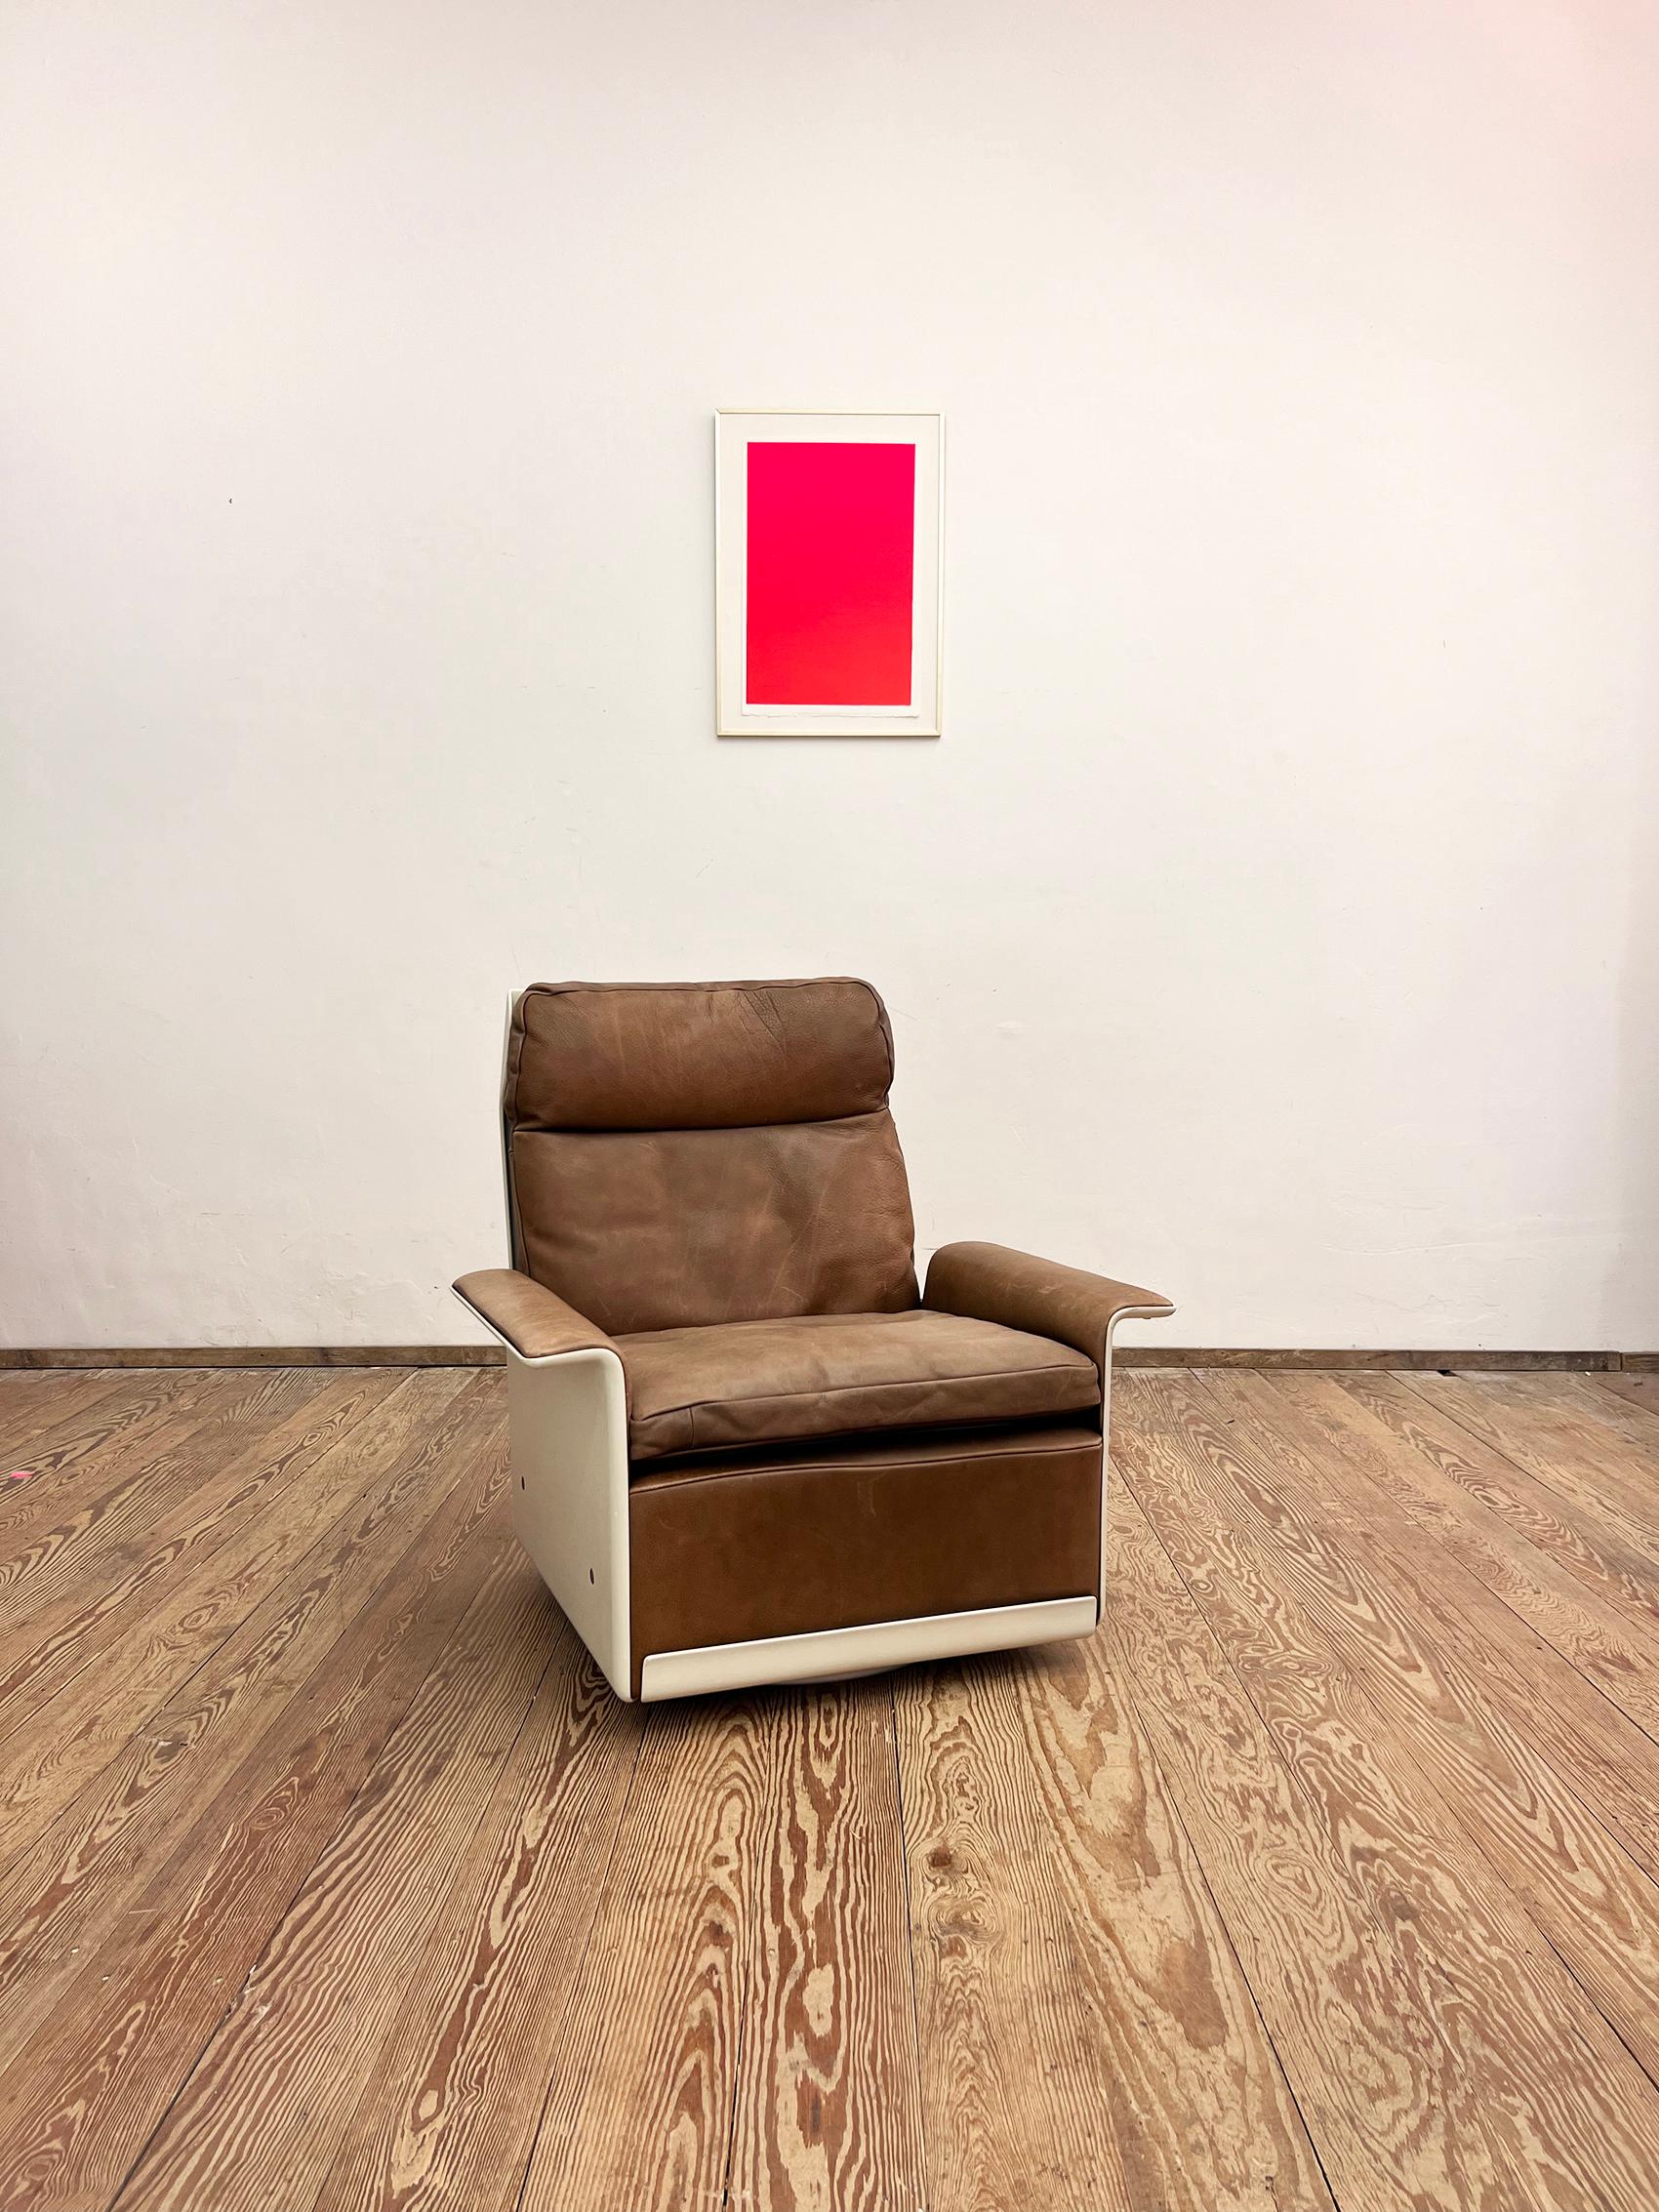 Dimensions ca. 88 x 78 x 88 x 43 cm (WxDxHxSH)

This shapely and comfortable lounge easy chair was designed by German Designer Dieter Rams for Vitsoe in the 1960s in Germany. The 620 series is a system of furniture parts that can be used to create